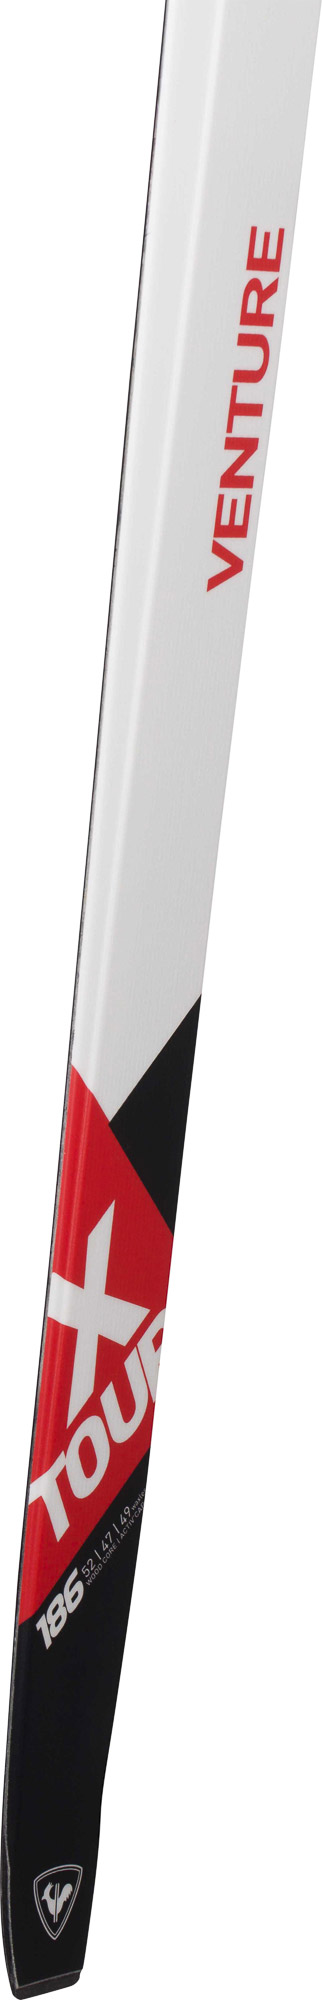 Classic style Nordic skis with climbing support